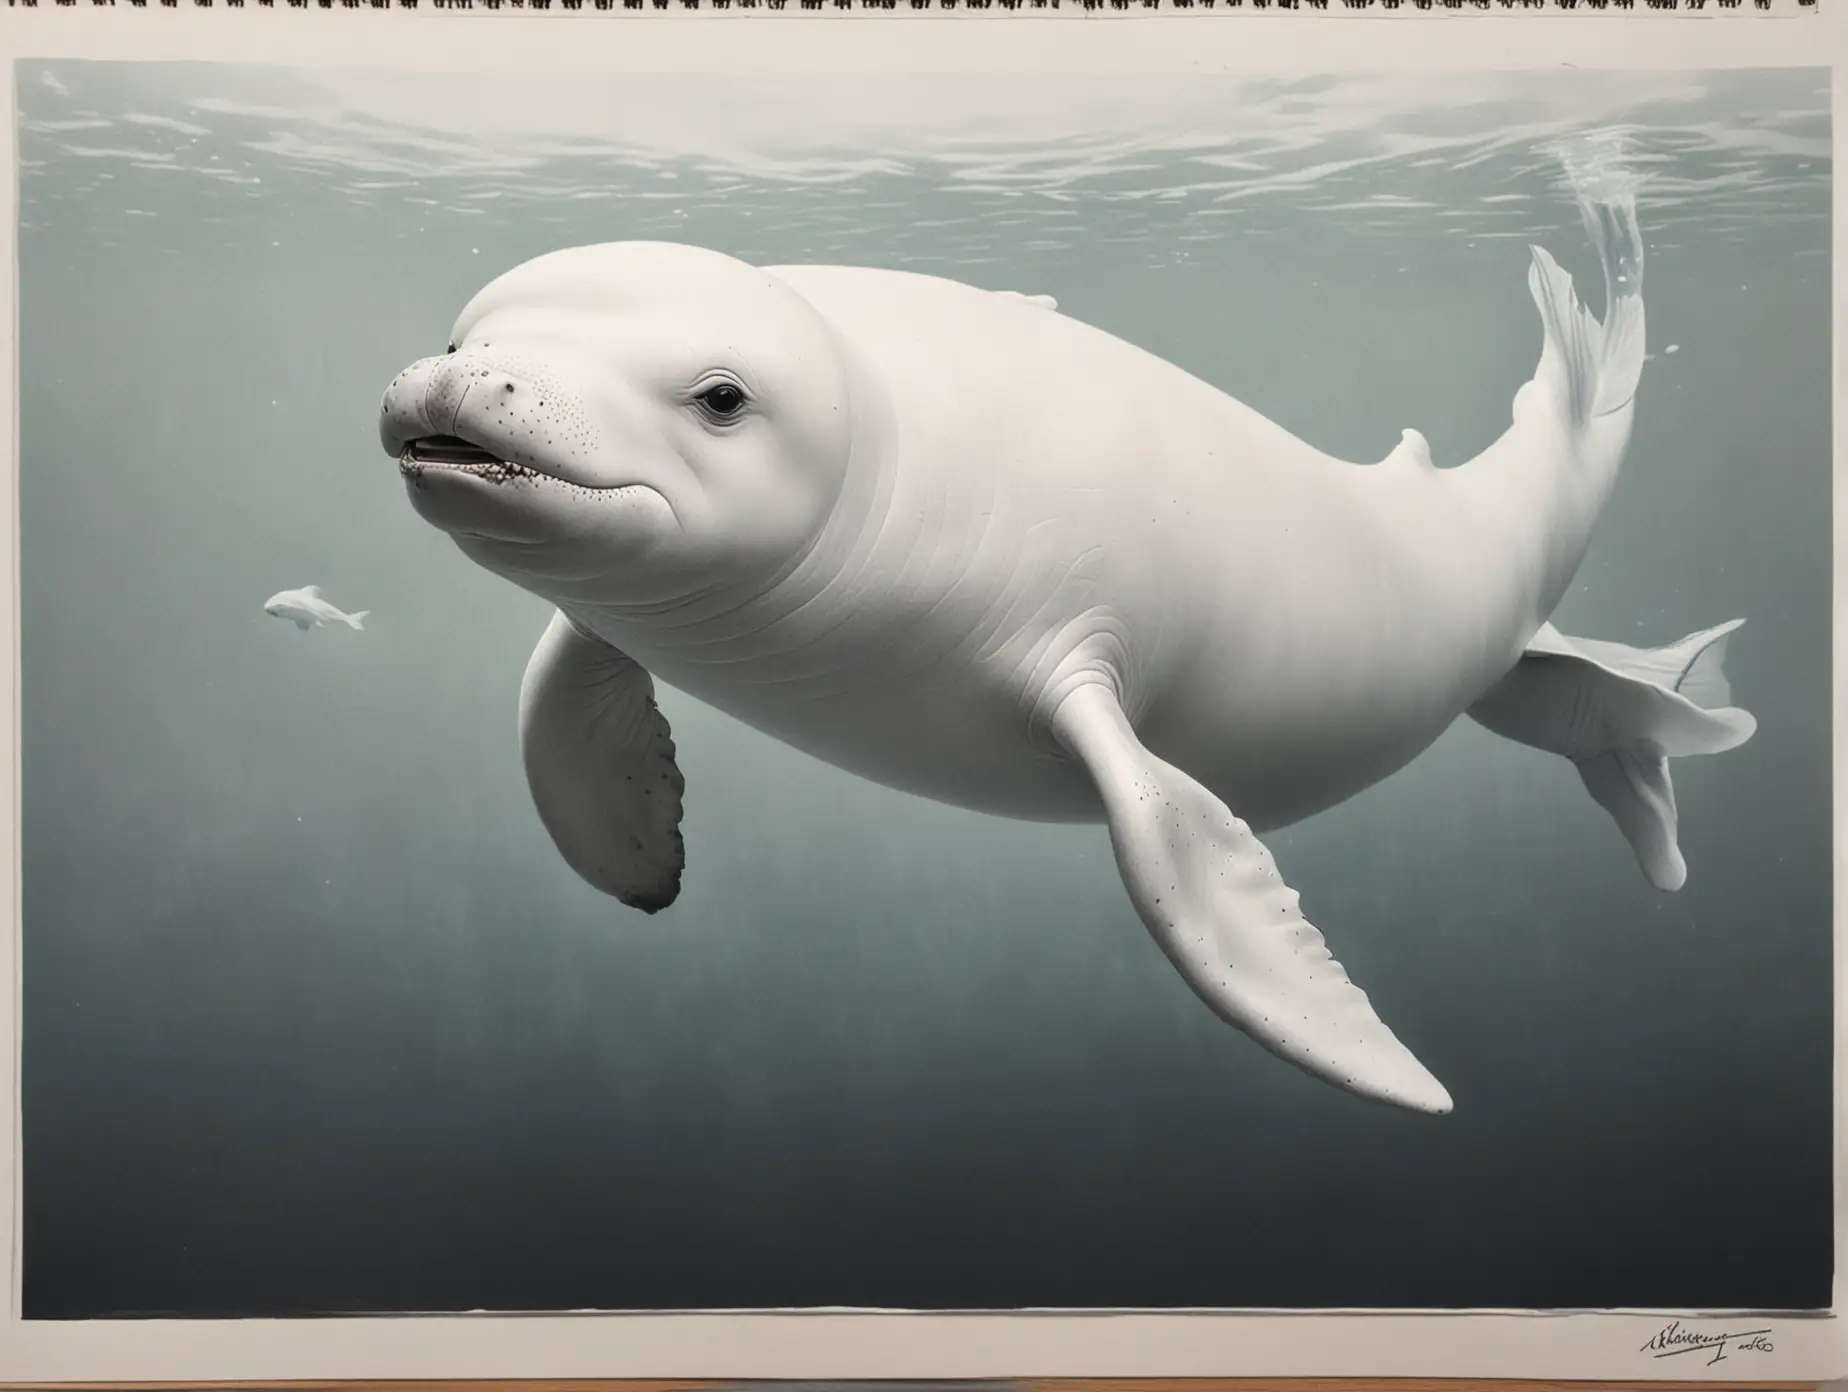 Majestic-Realistic-Drawing-of-a-Beluga-Whale-Swimming-in-Clear-Ocean-Waters